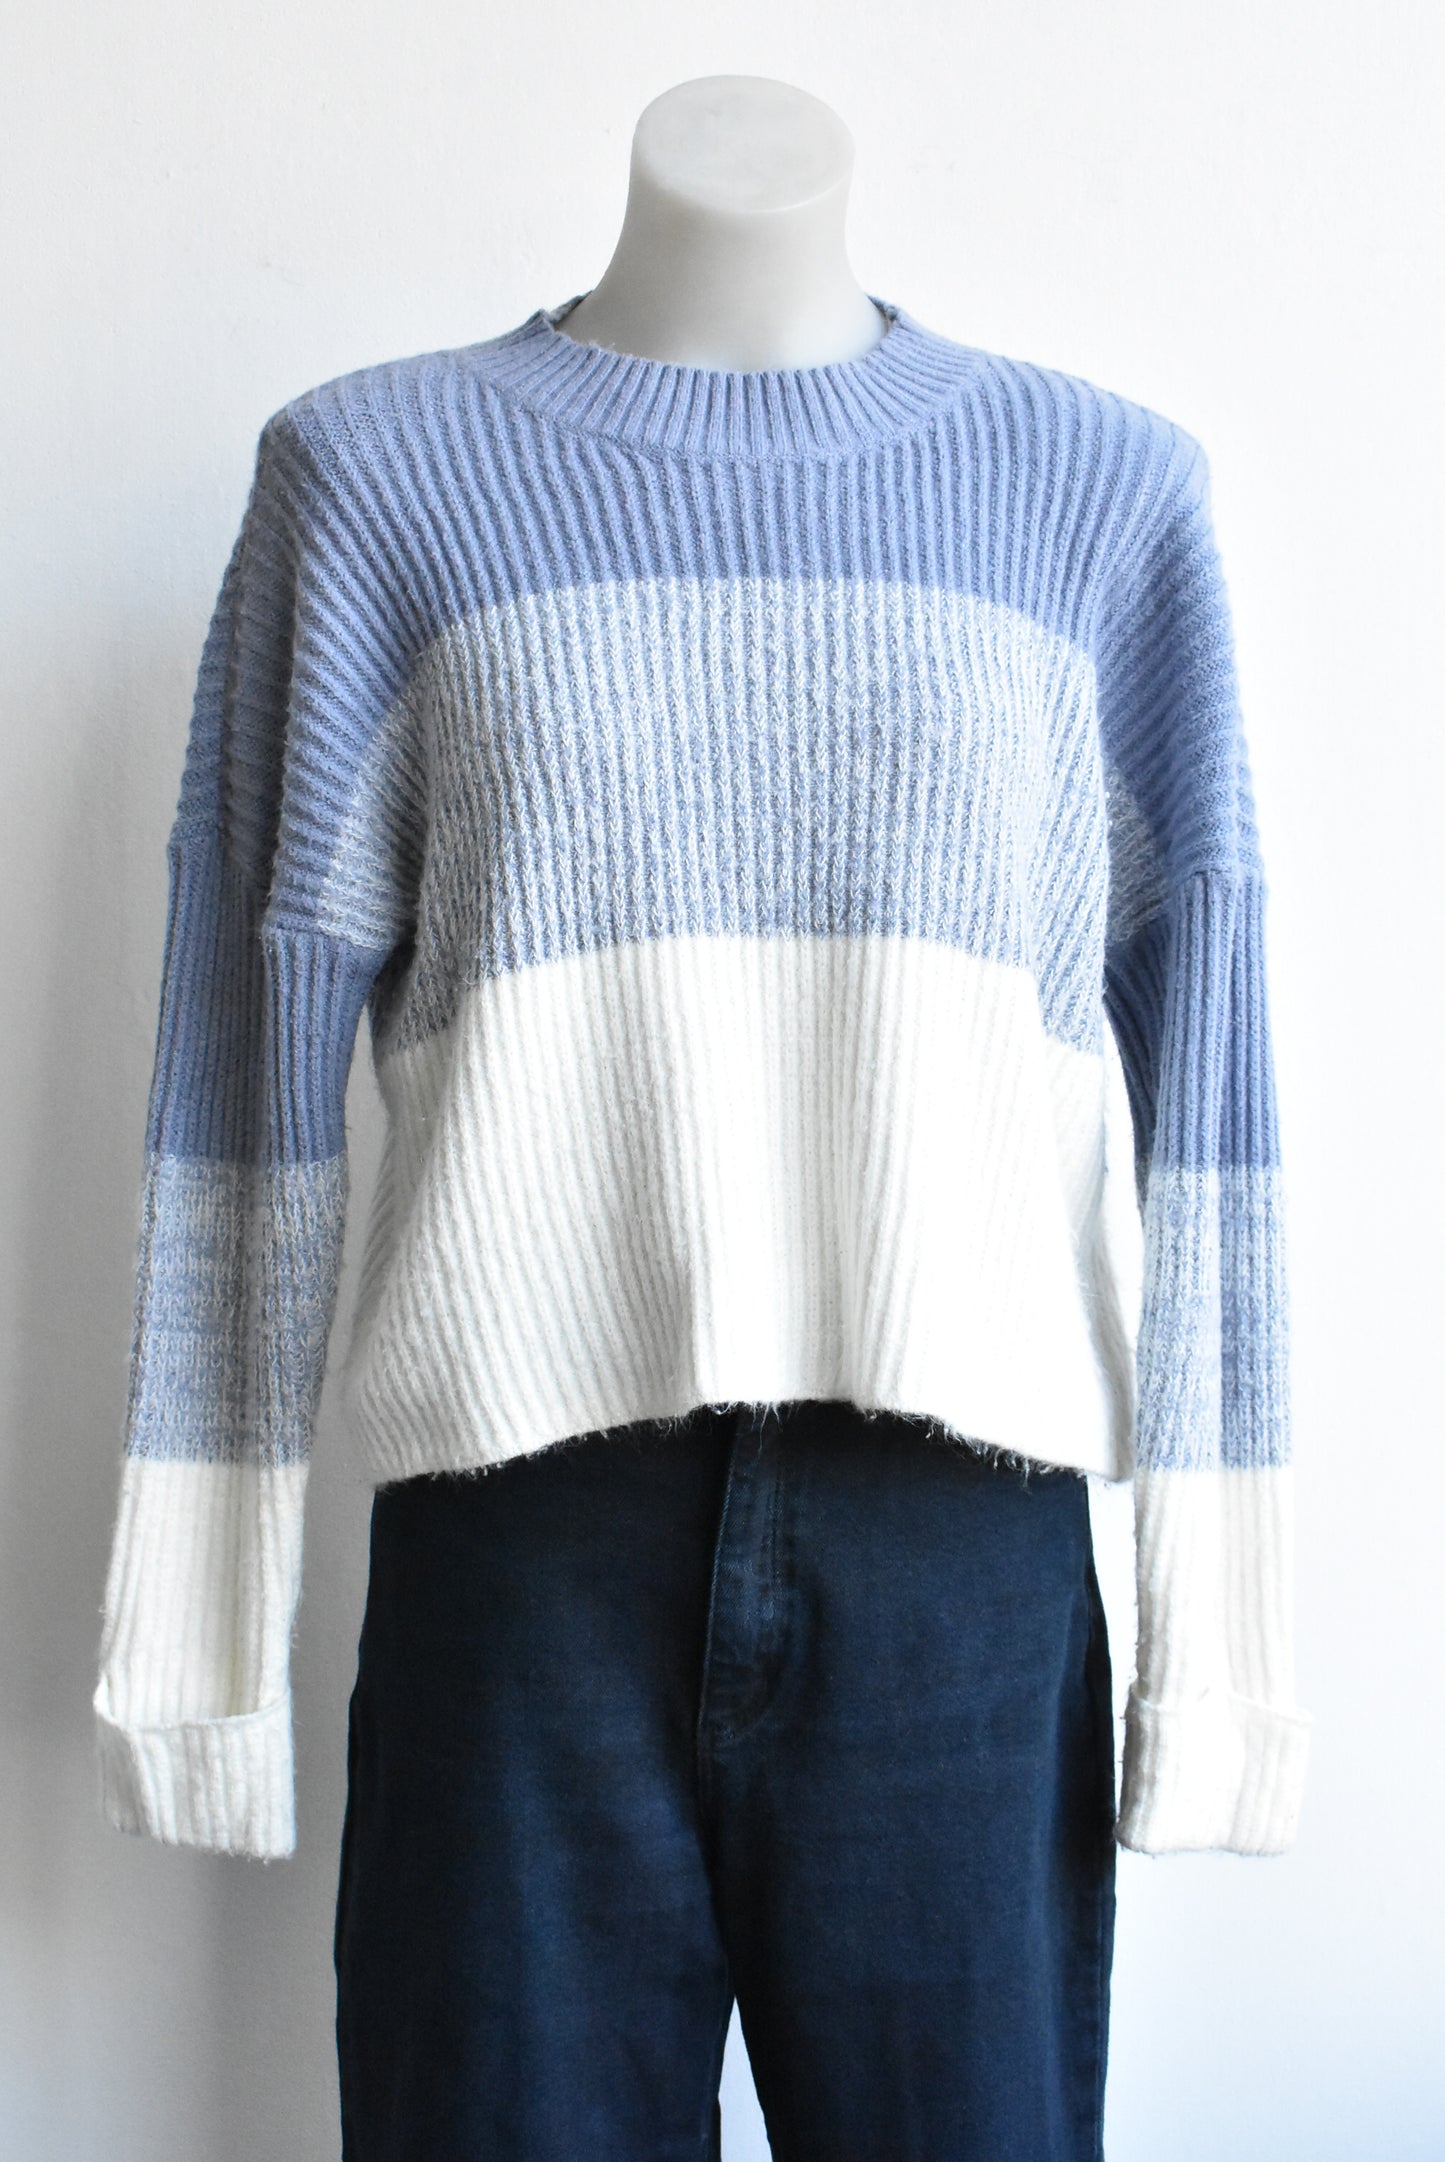 Mirrou blue and white cropped jersey, size L